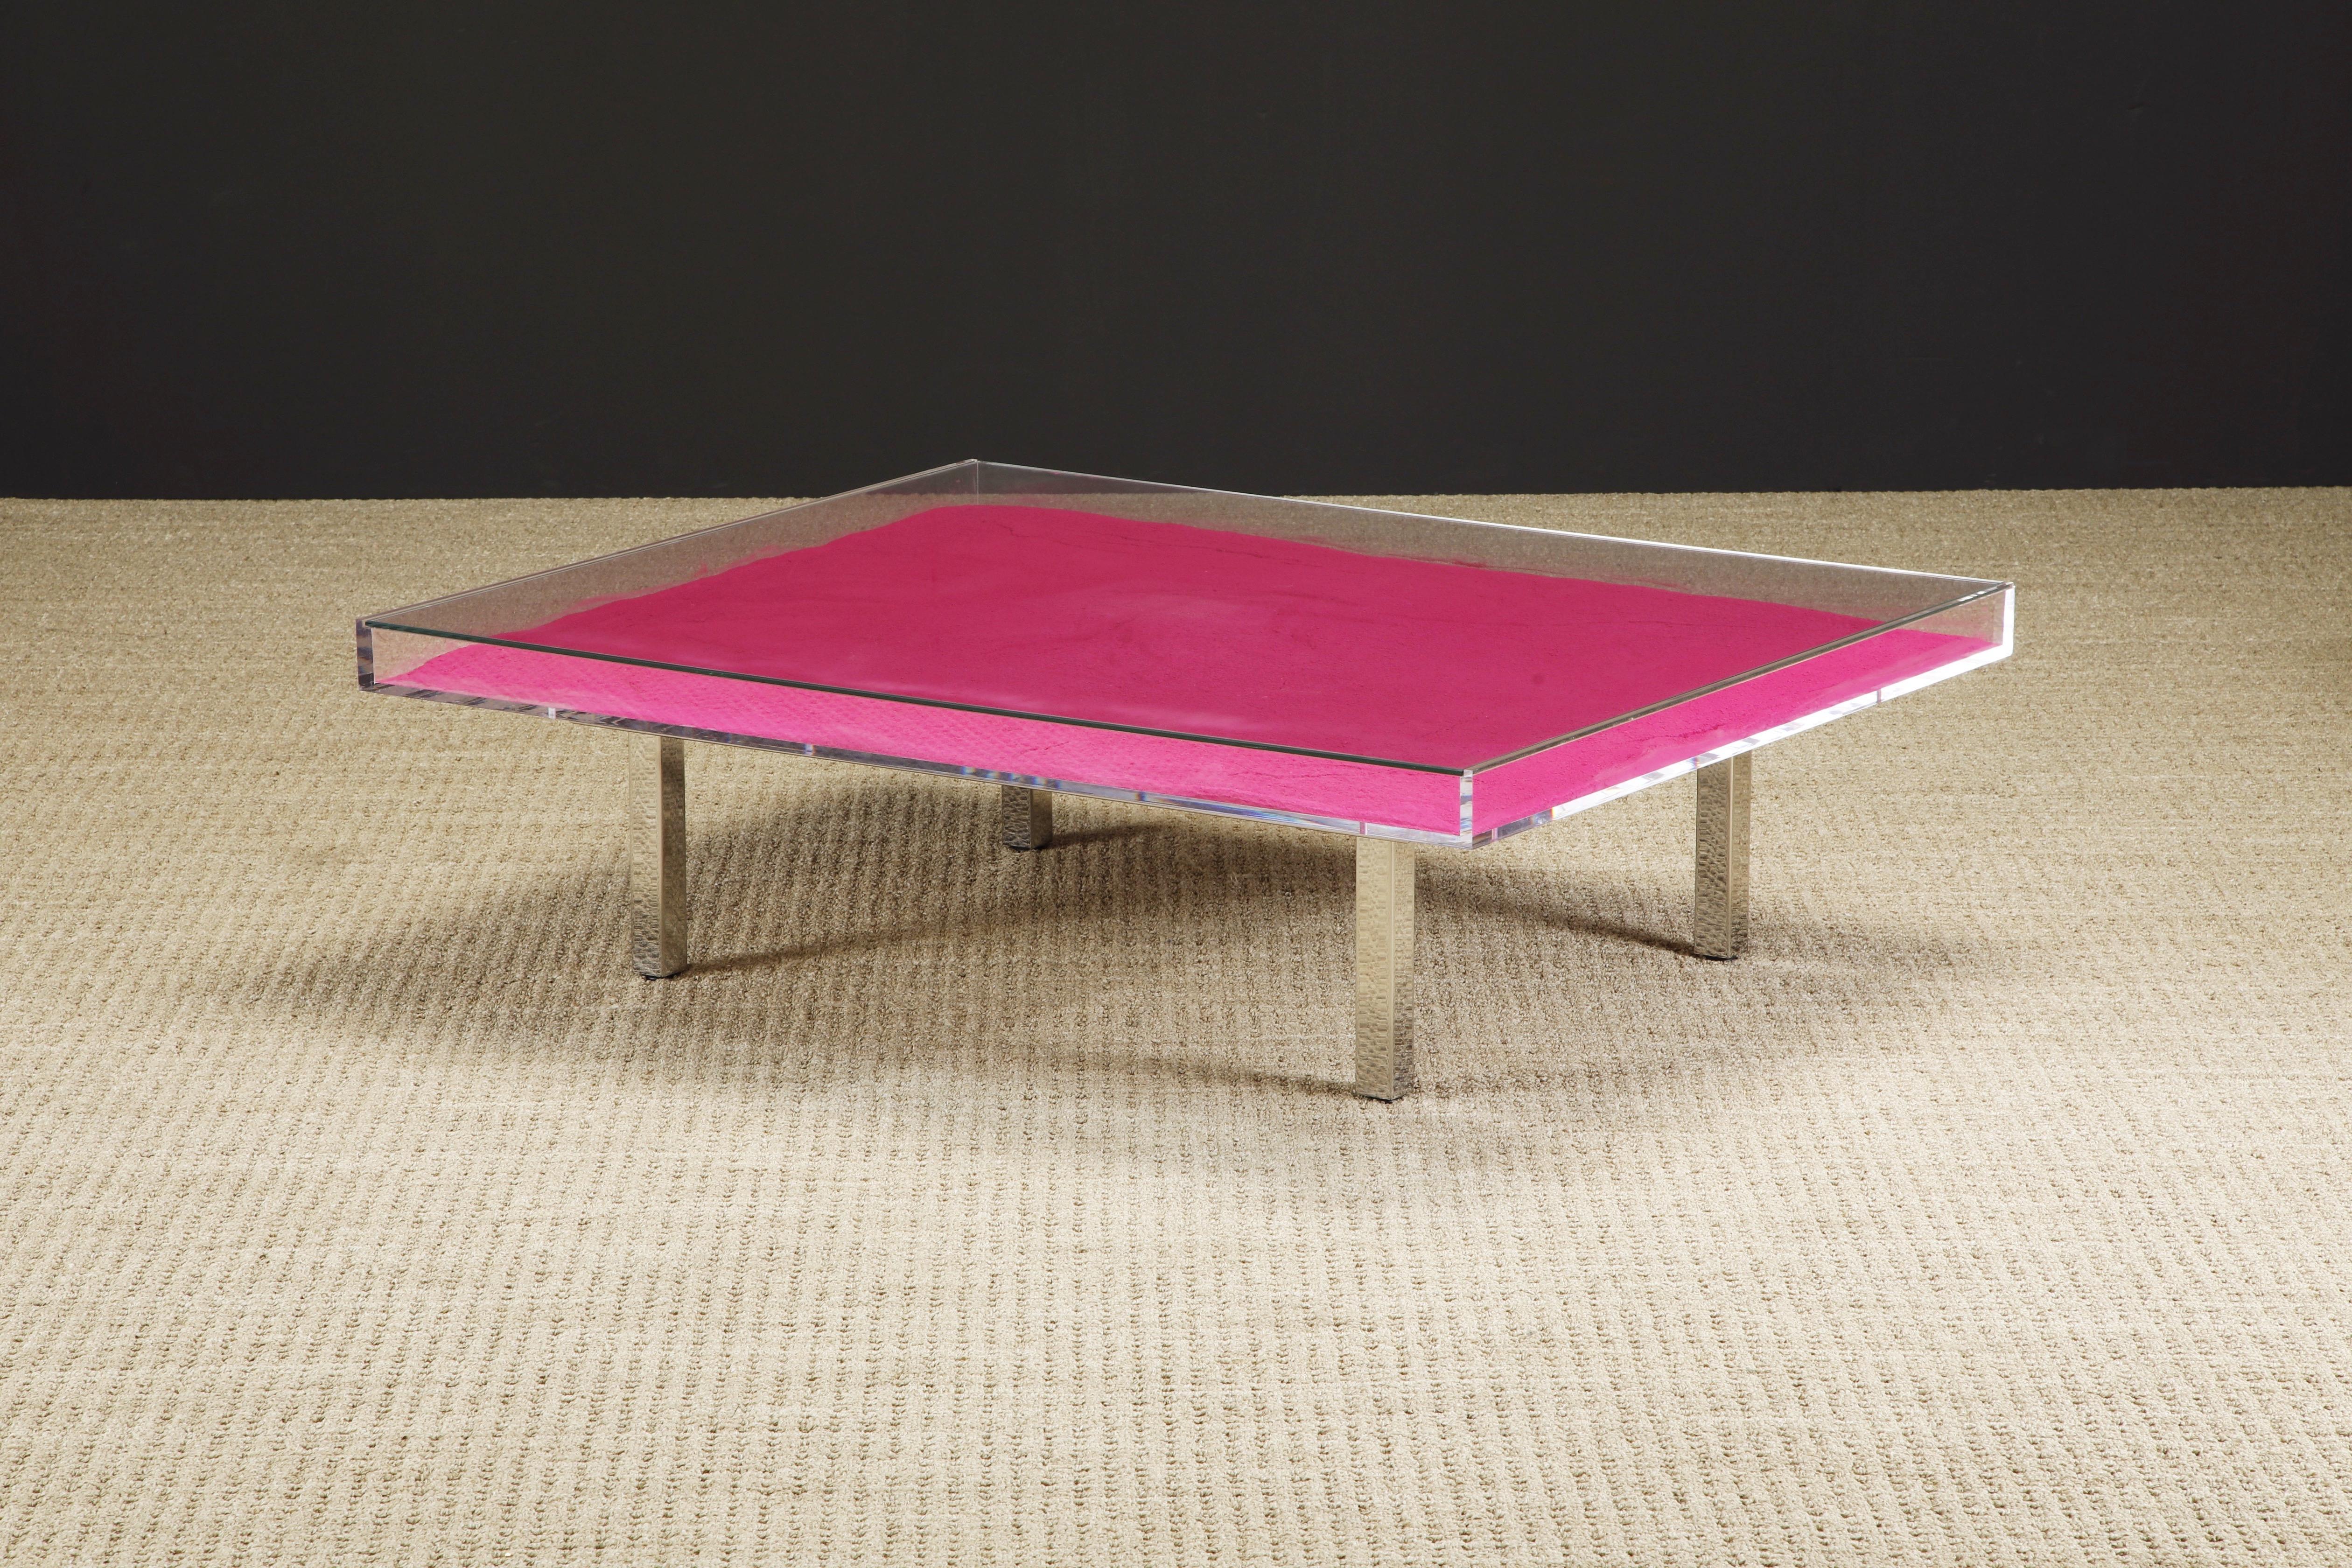 20th Century Yves Klein 'Monopink' Rose Pigment Cocktail Table, 1961 / 1963 France, Signed 